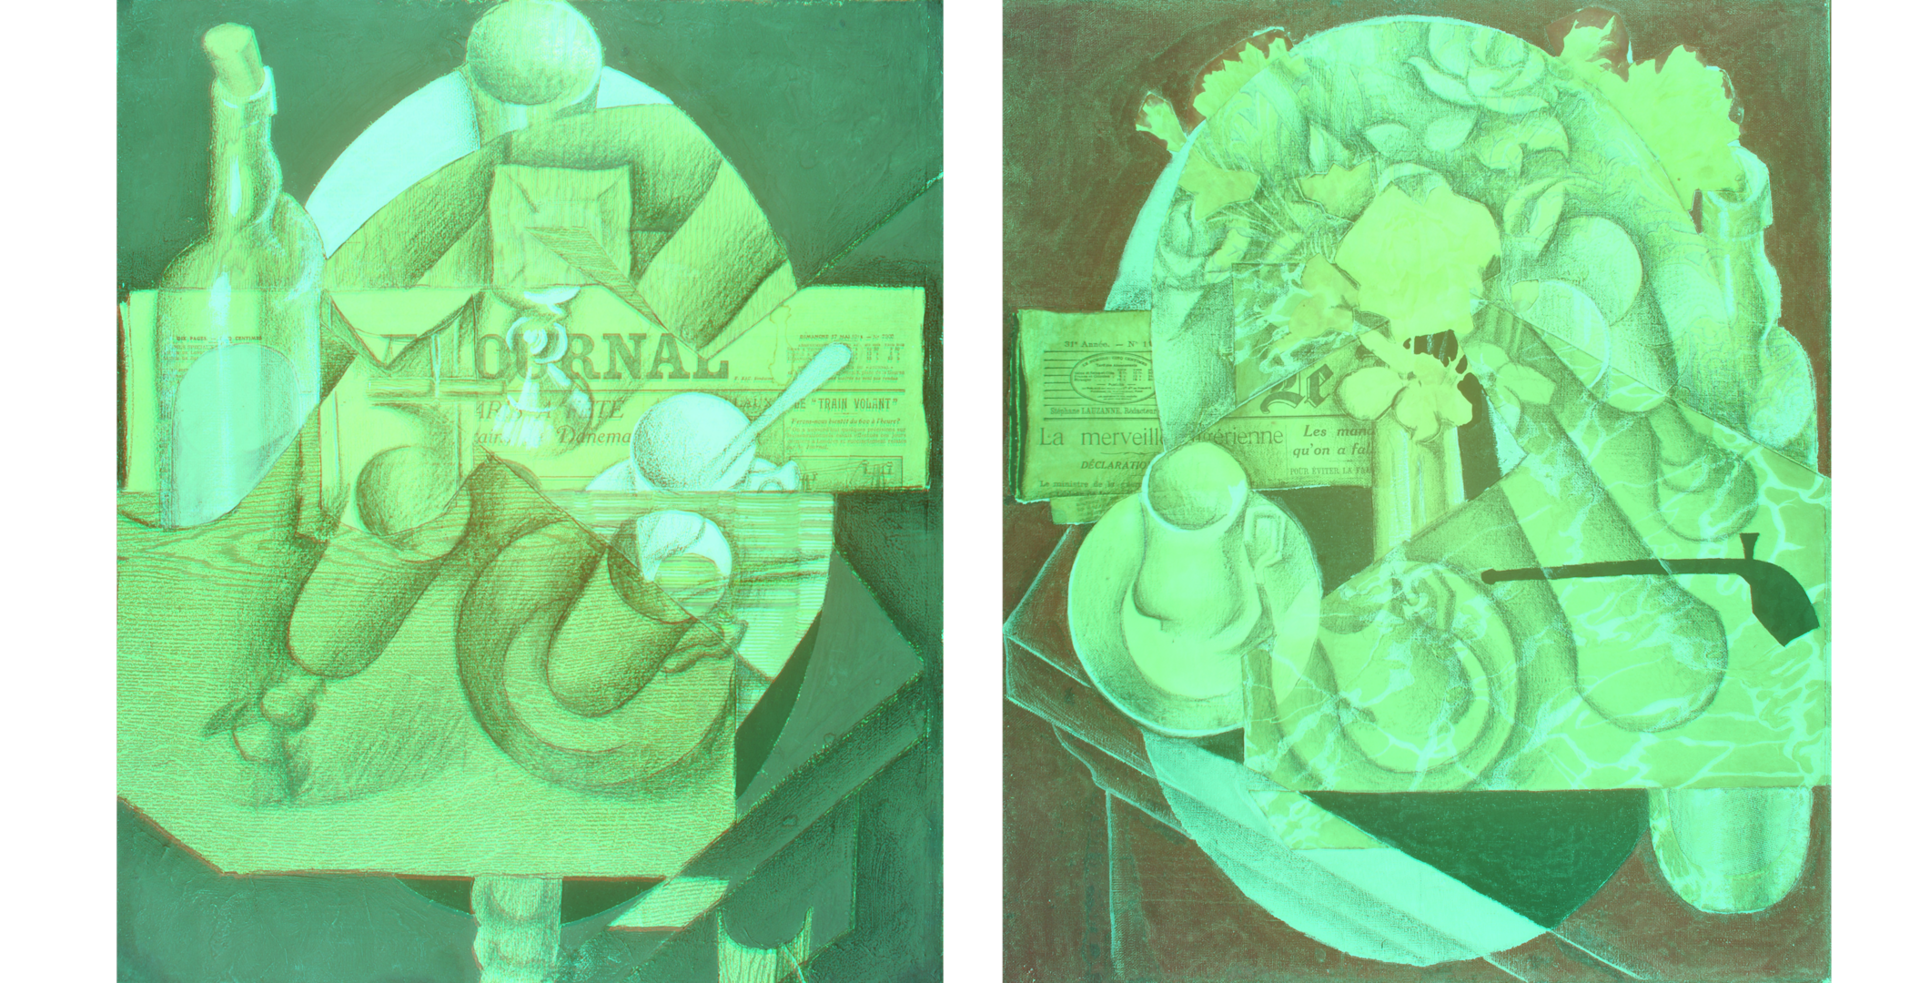 Gris’s collages, “Cup, Glasses, and Bottle (Le Journal)” and “Flowers”, seen in neon green with two different background colors (blue and brown)